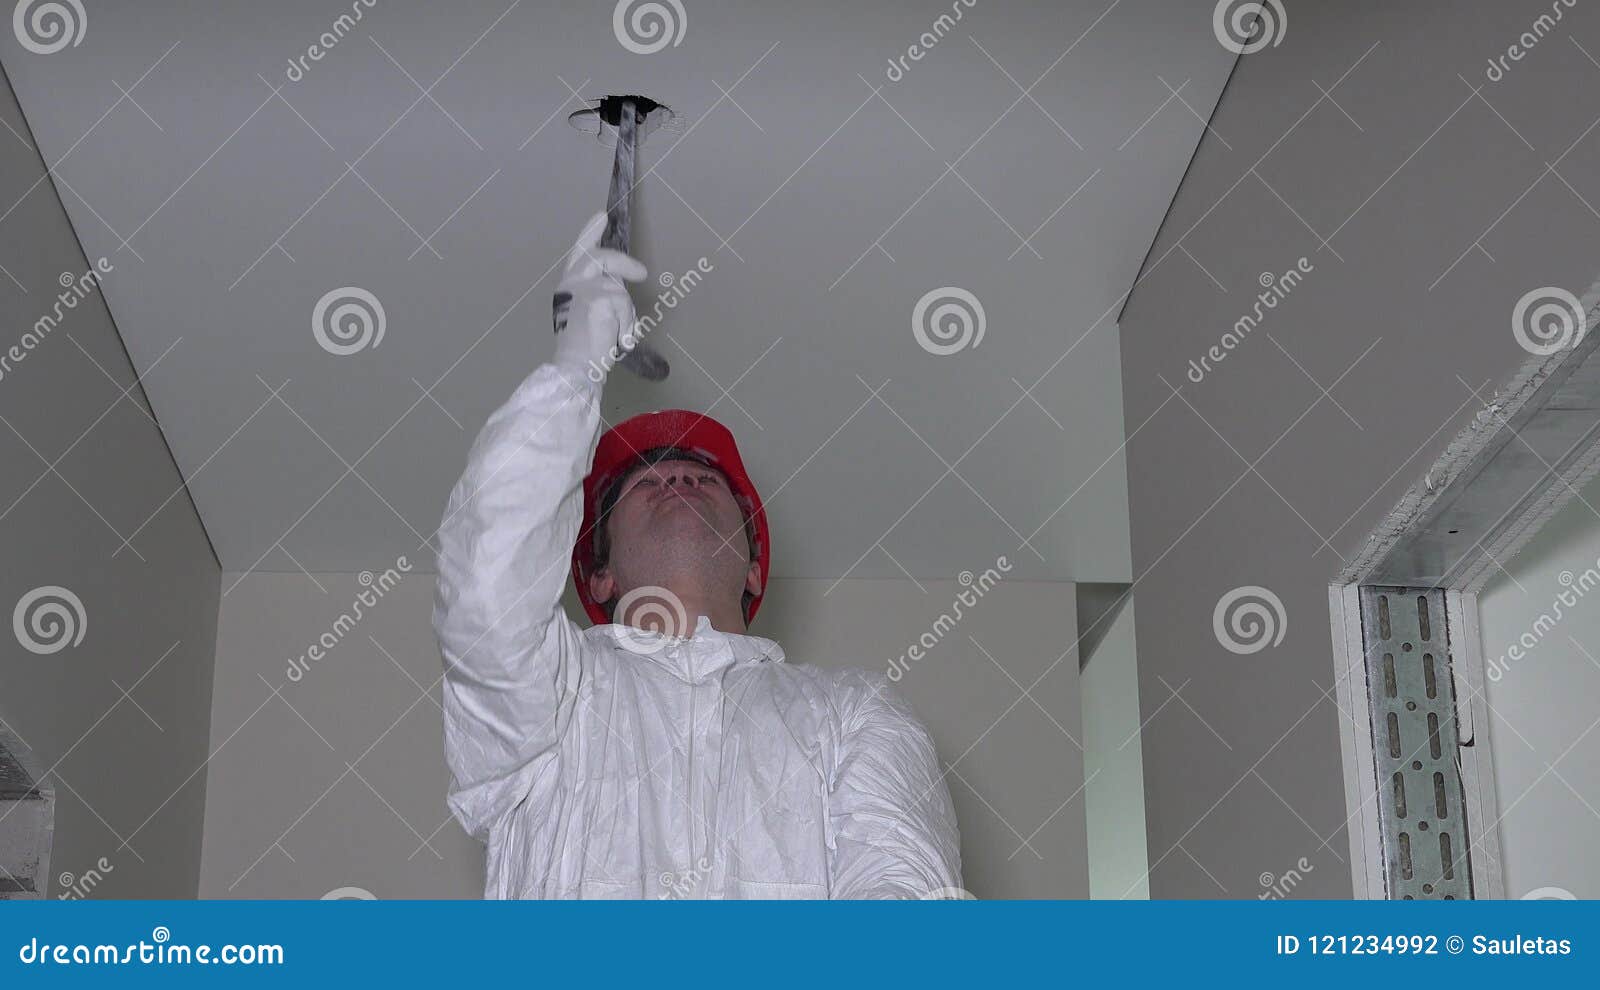 Professional Worker In Work Wear Make Drywall Ceiling Holes For Light Install